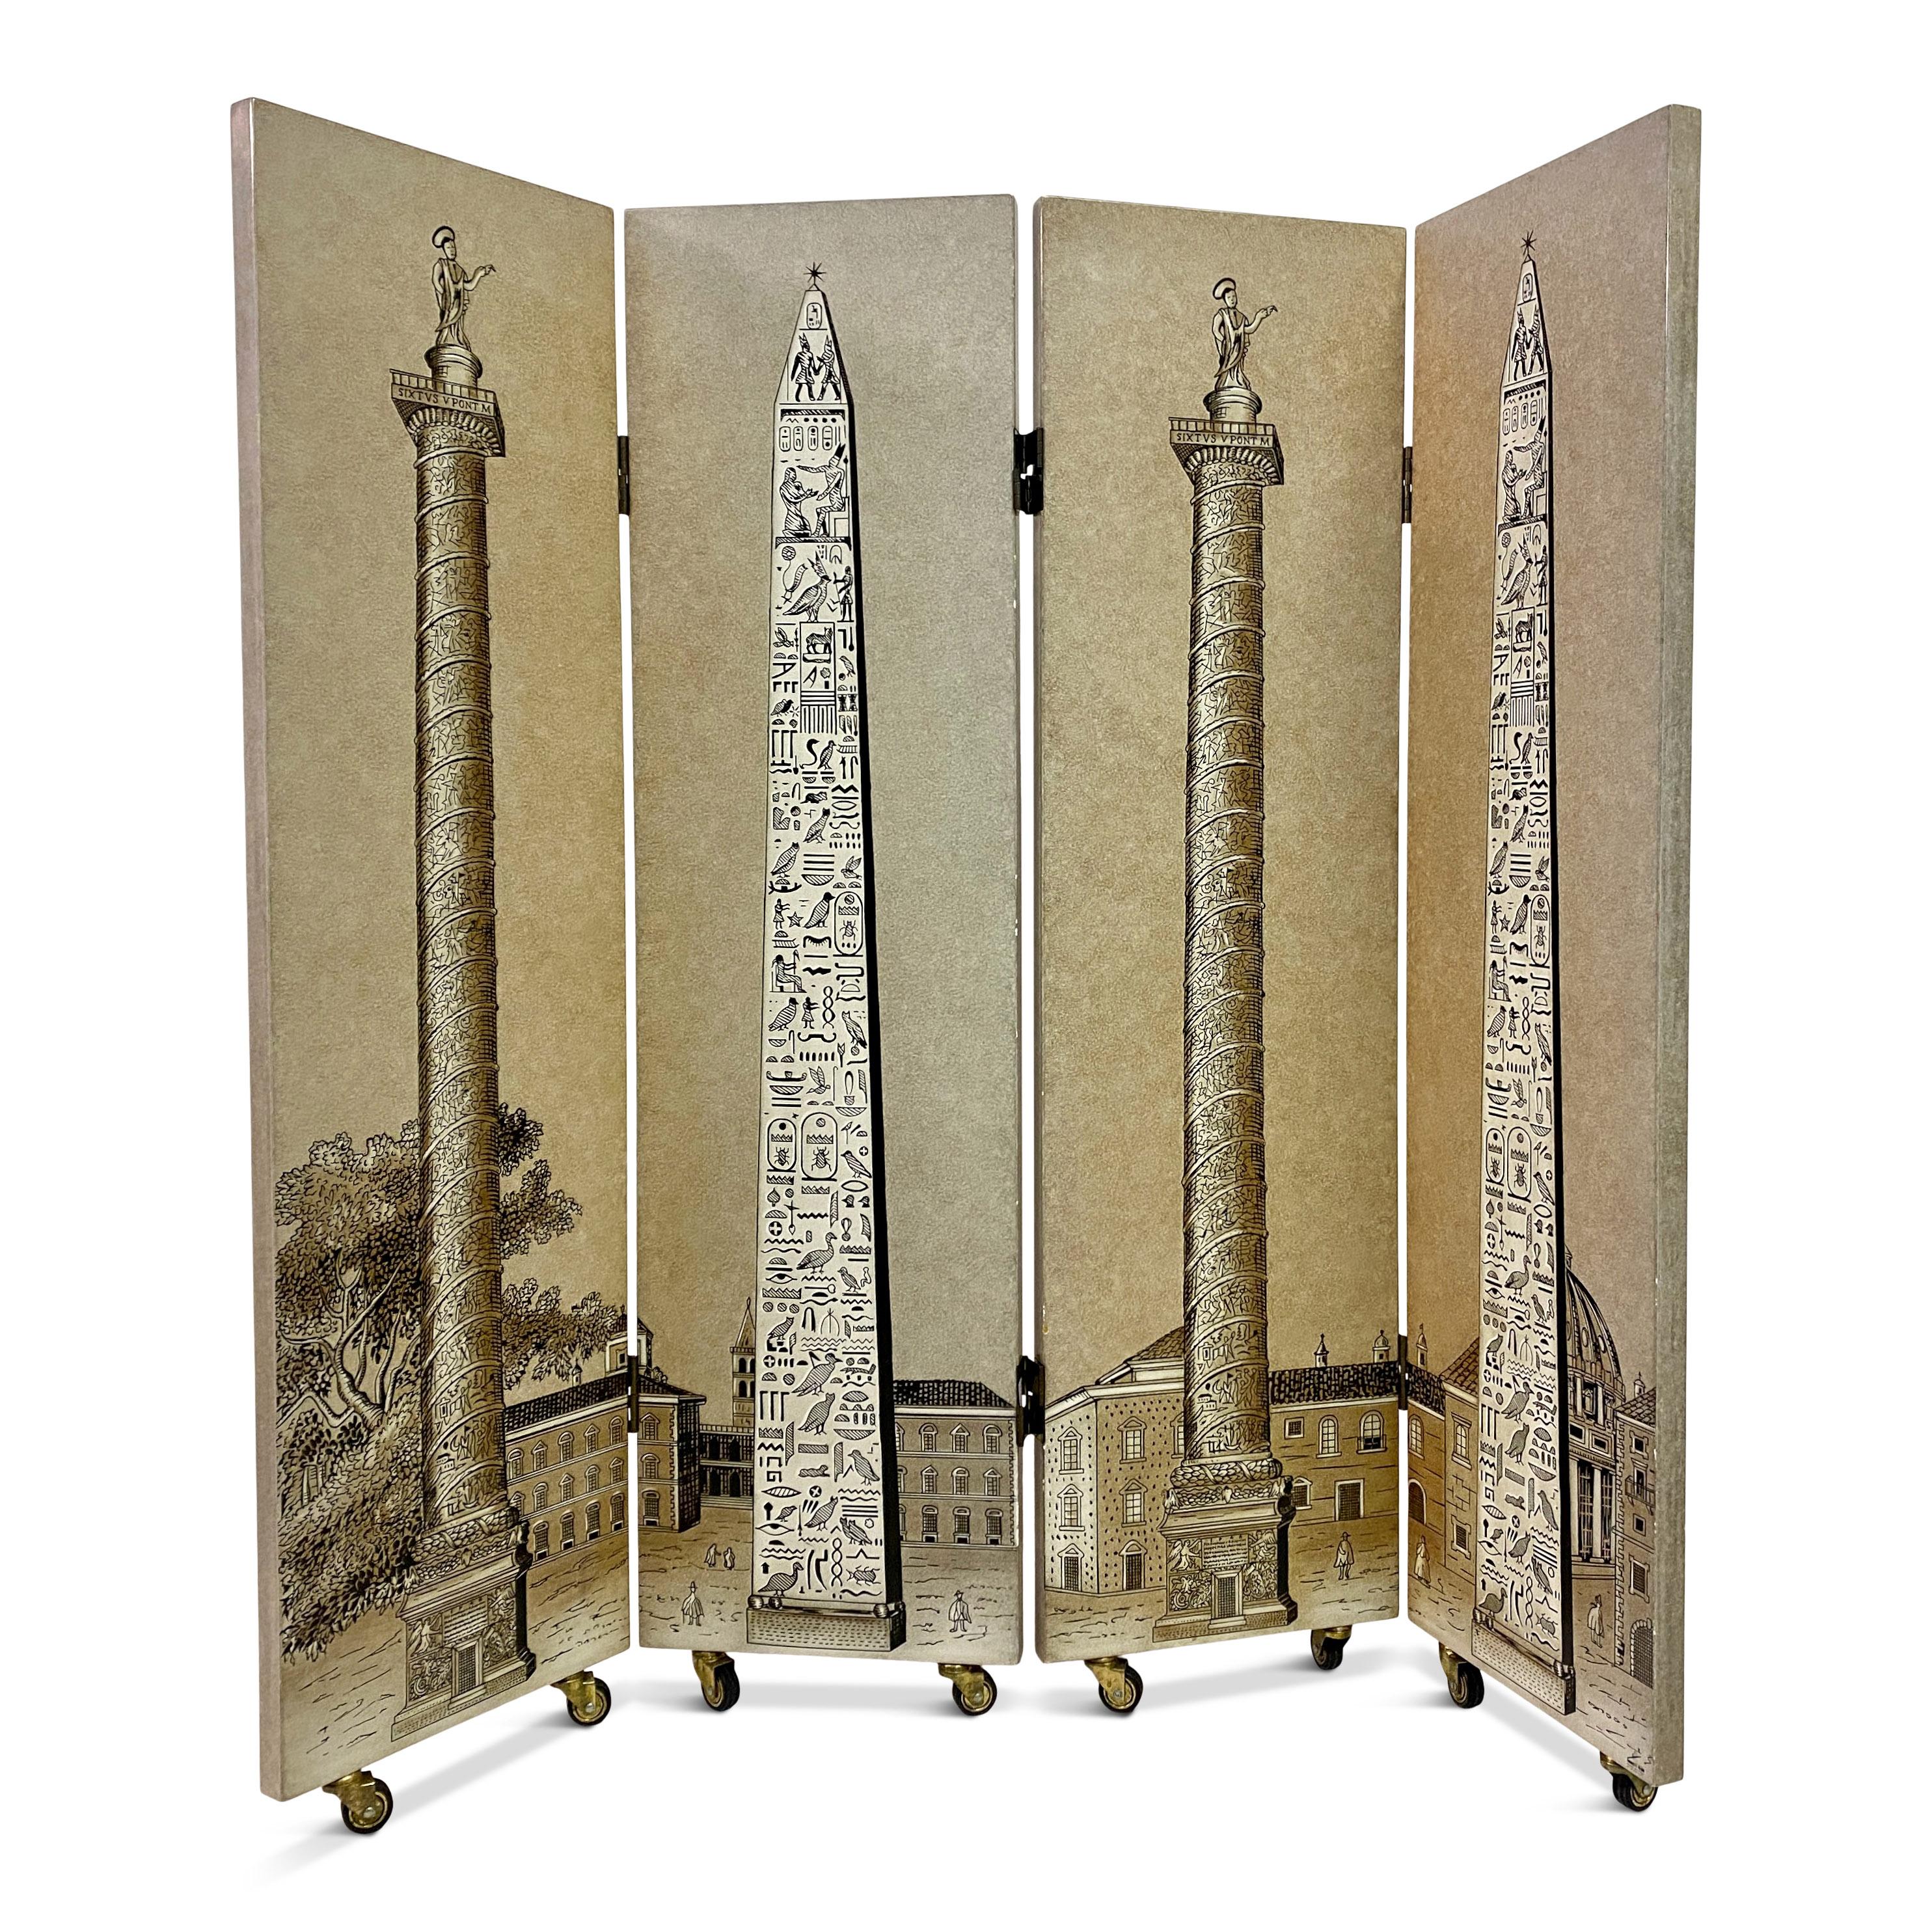 Folding Screen

Obelischi or Obelisk

By Piero Fornasetti

Lithographic printed

Signed

On castors

Italy, late 20th century.